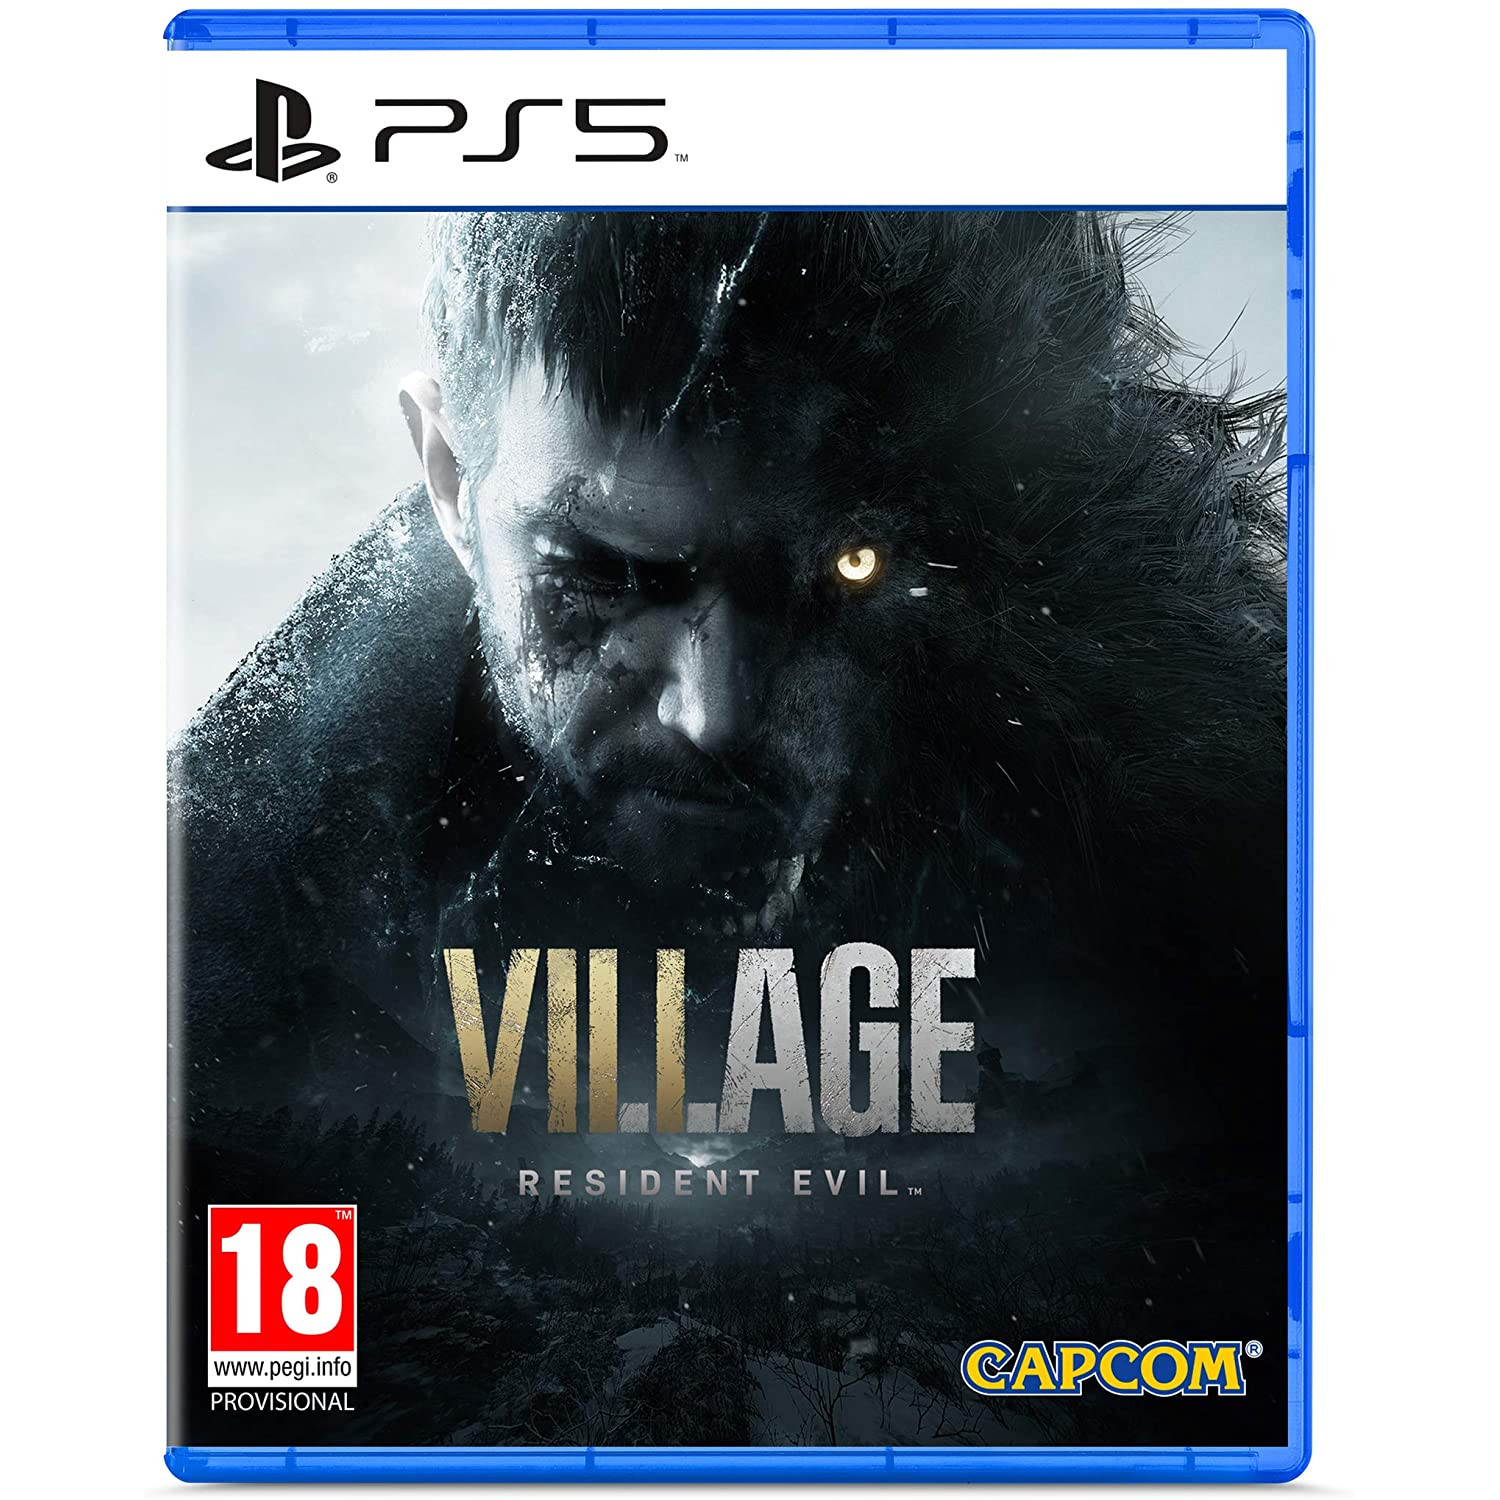 buy-ps5-resident-evil-village-latest-games-ps5-games-ifix-mobiles